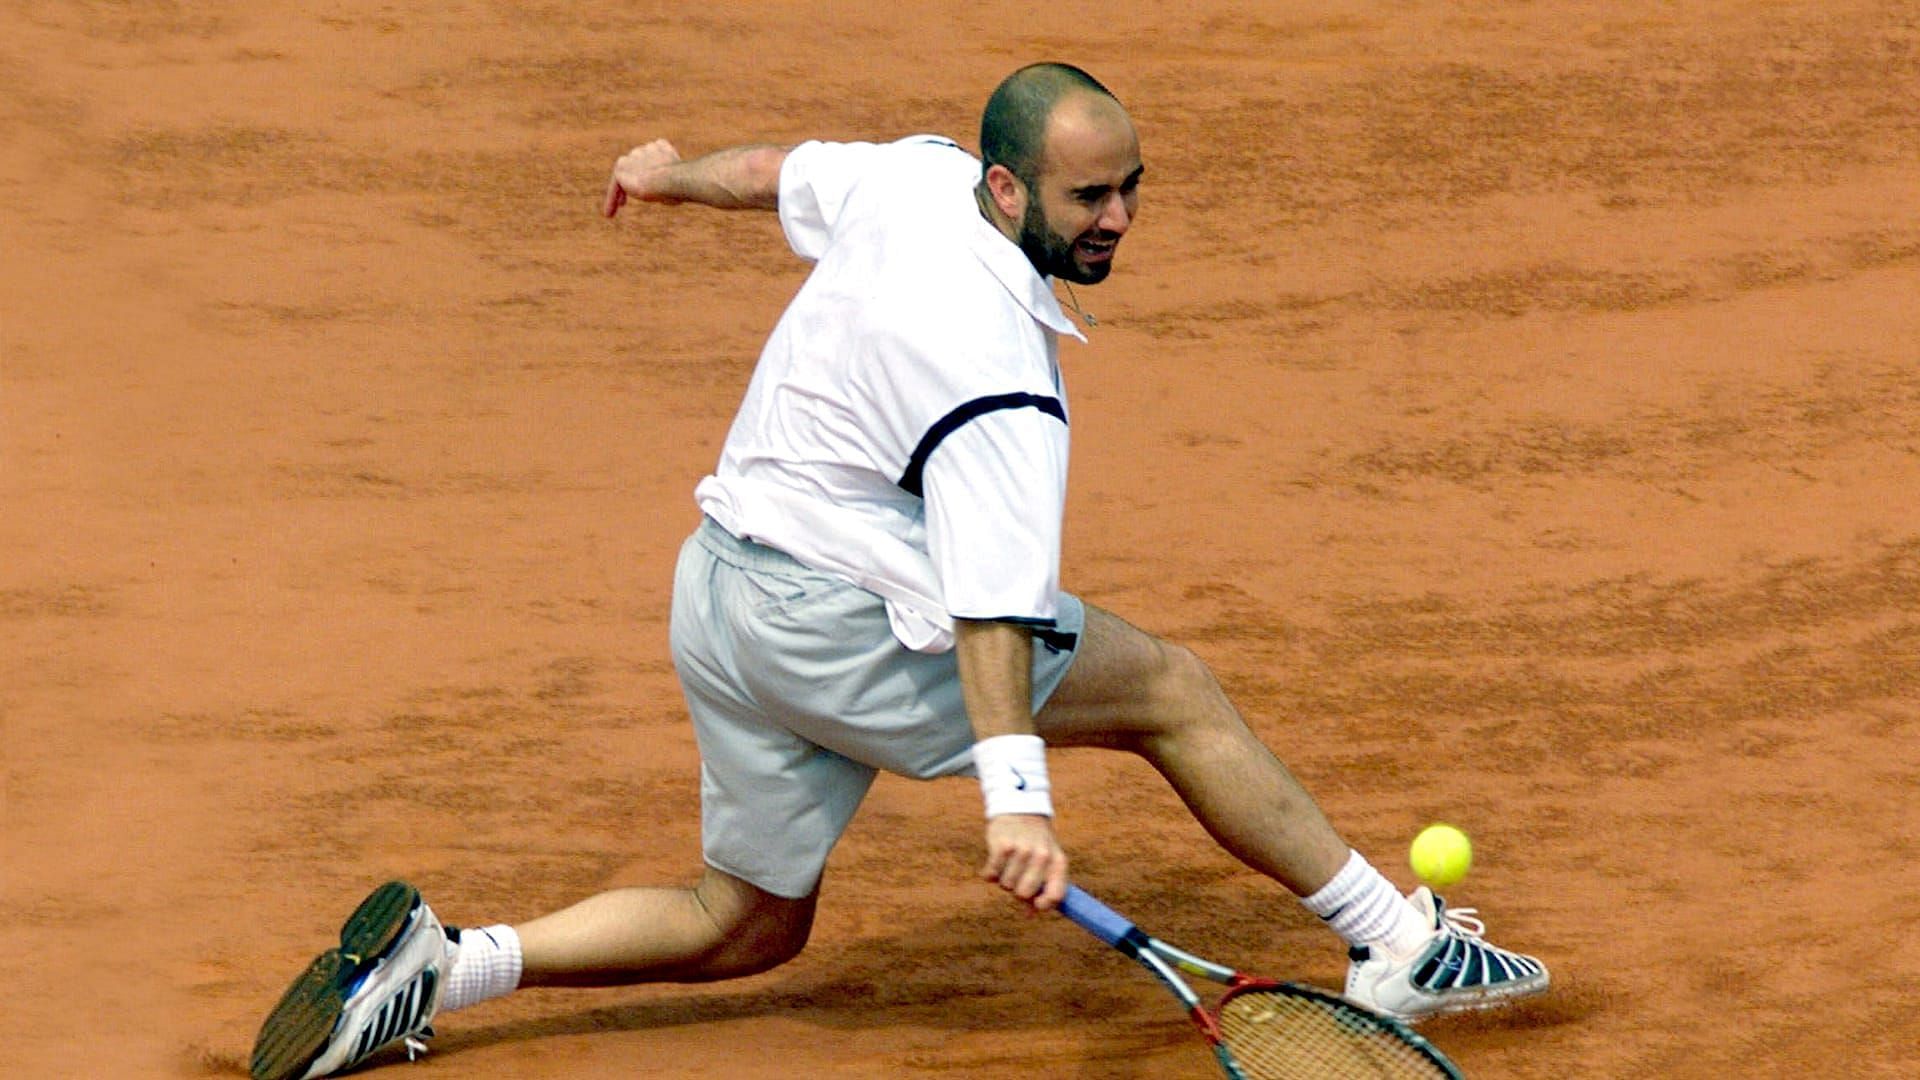 Andre Agassi at the 1999 French Open Final